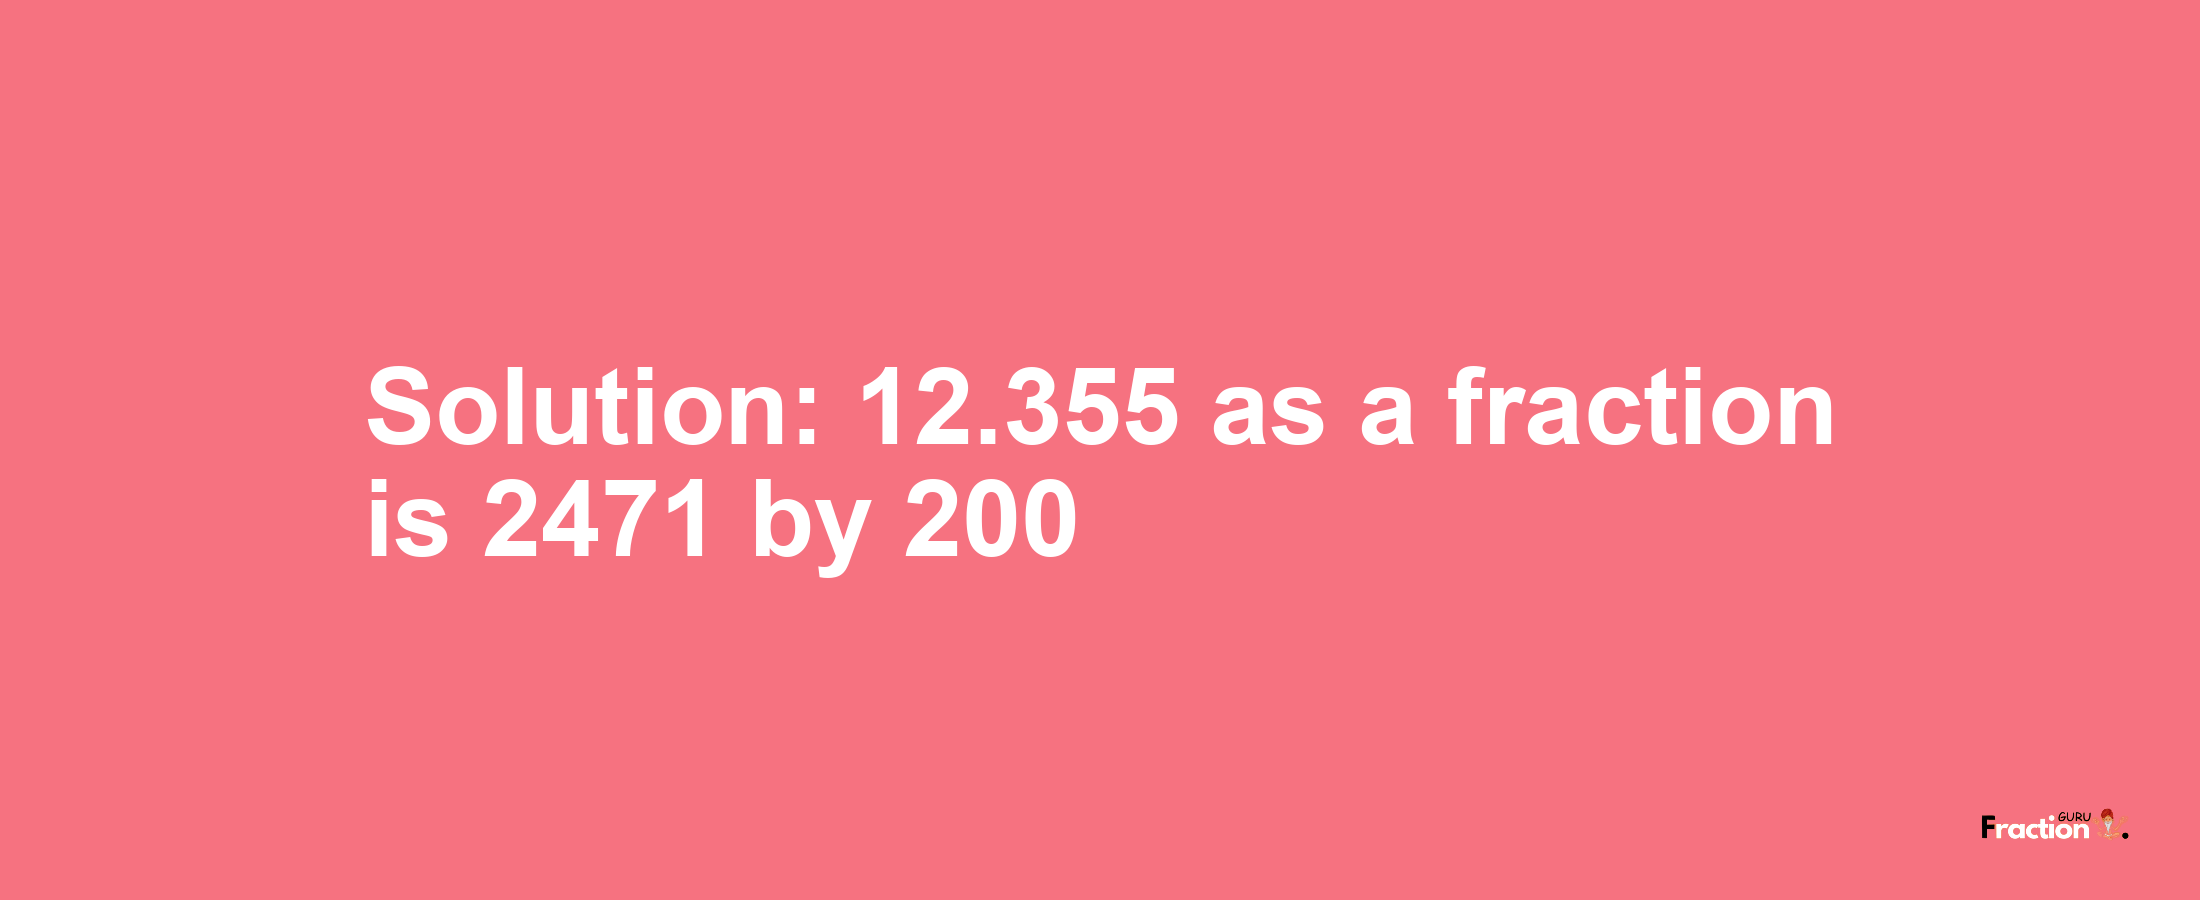 Solution:12.355 as a fraction is 2471/200